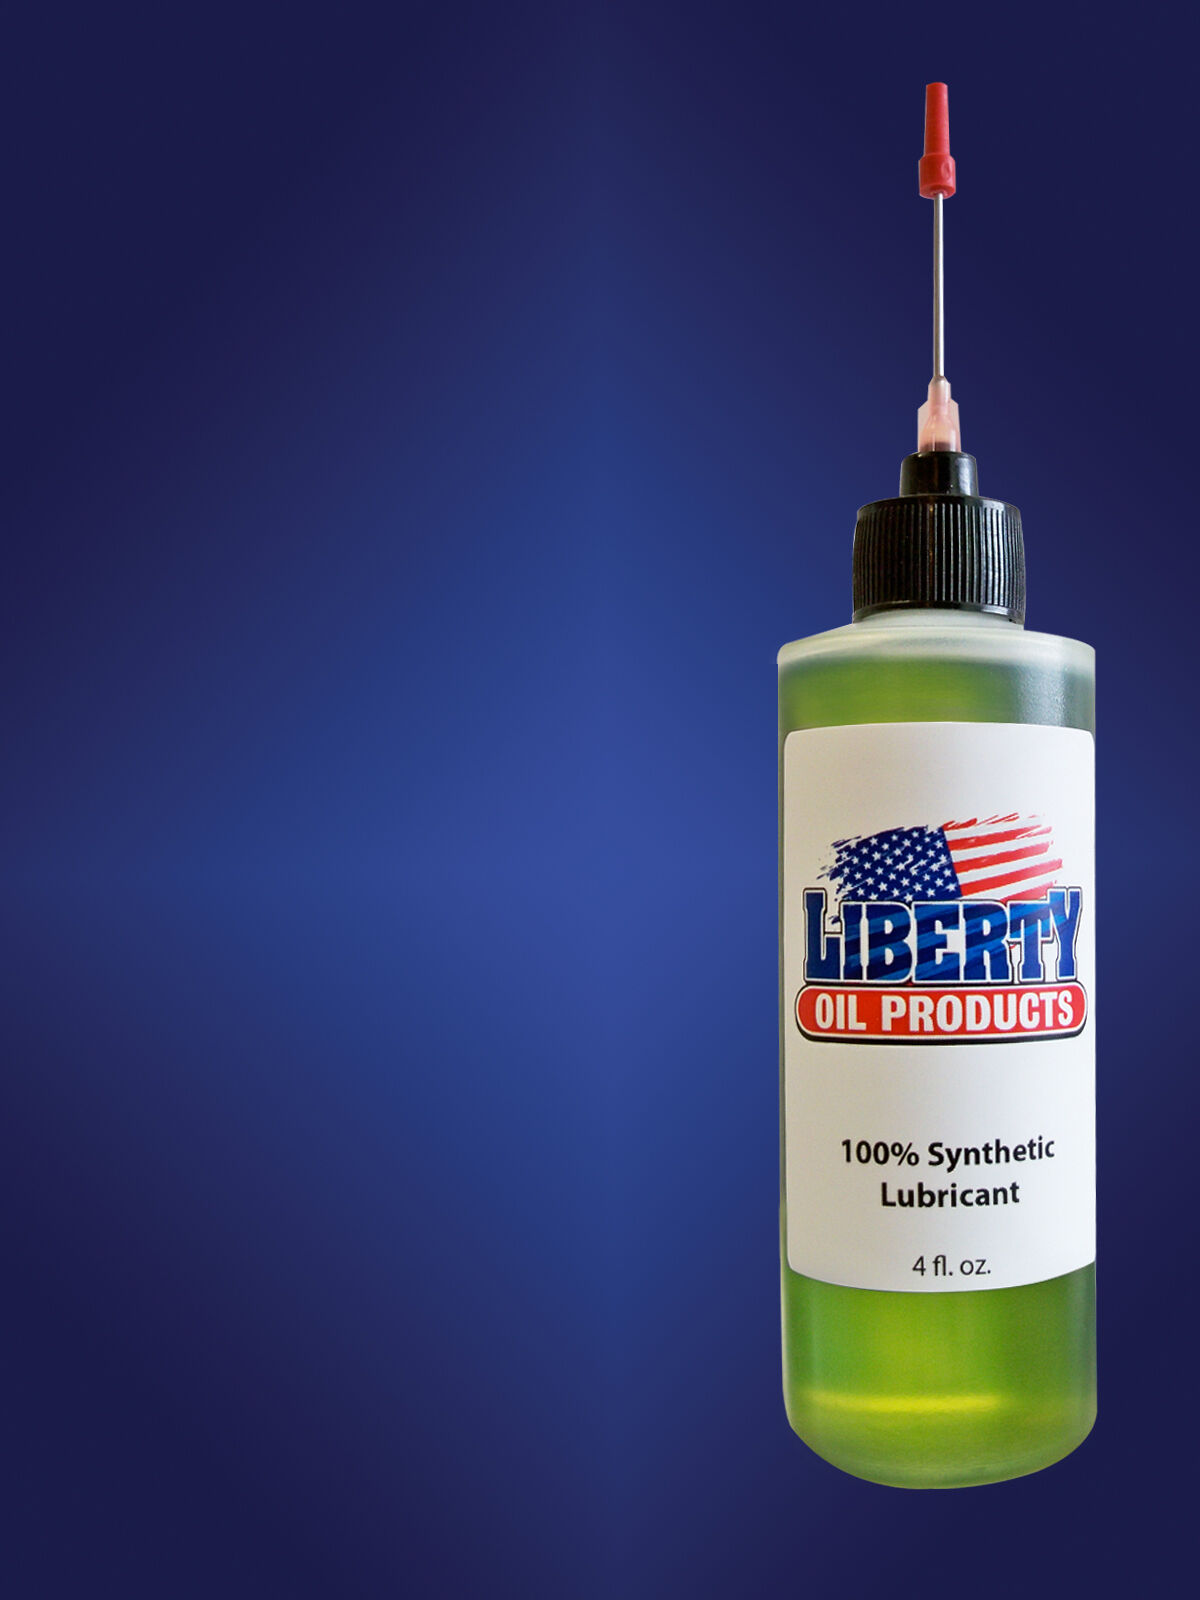 The best 100% Synthetic Oil for lubricating Lionel trains-4oz Bottle